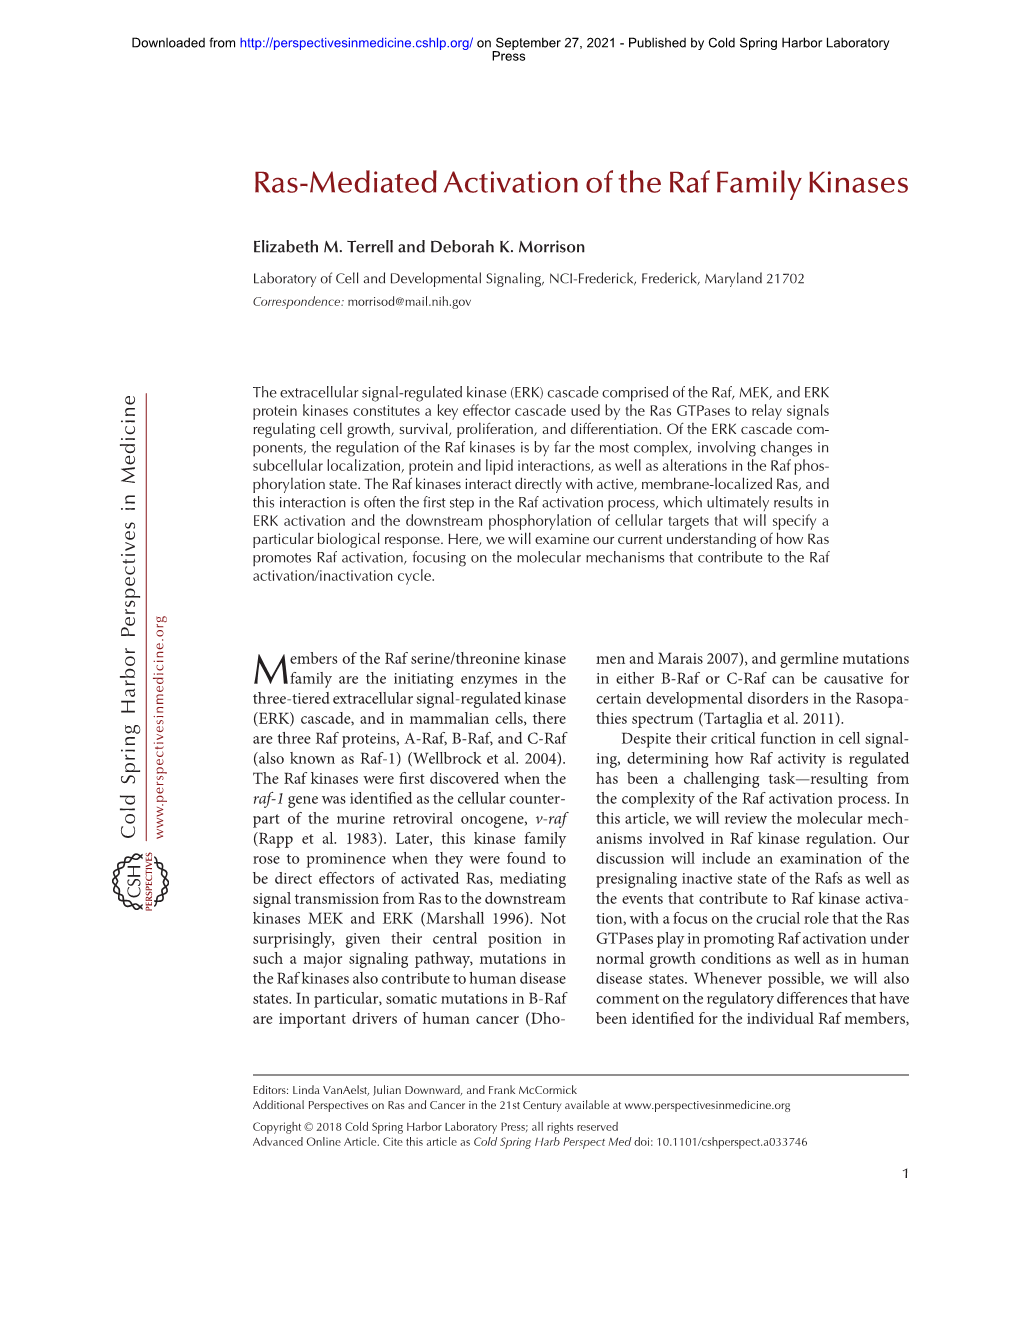 Ras-Mediated Activation of the Raf Family Kinases